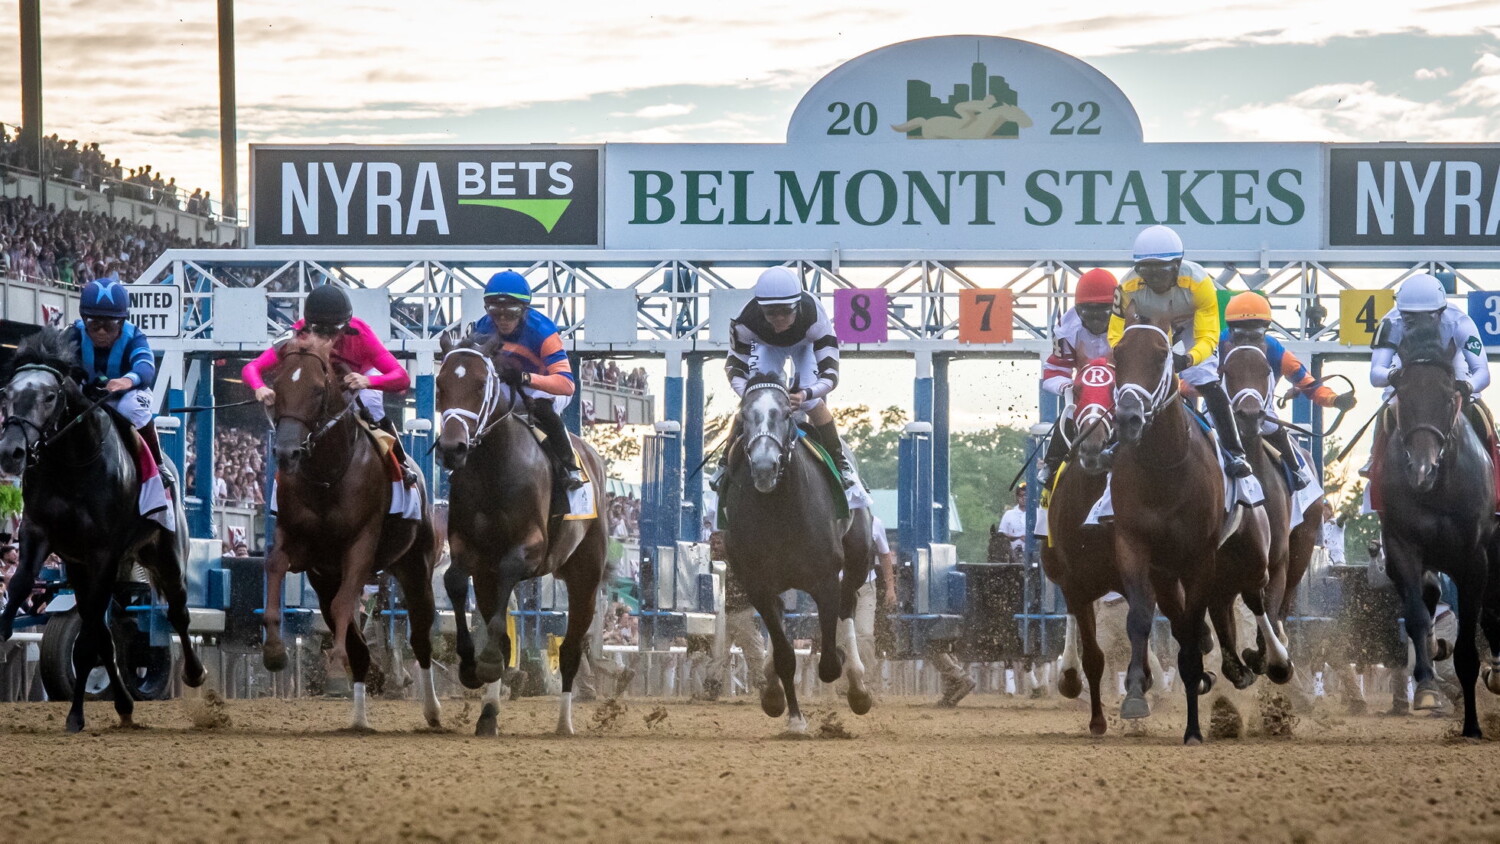 Scommesse Bitcoin sulle Belmont Stakes